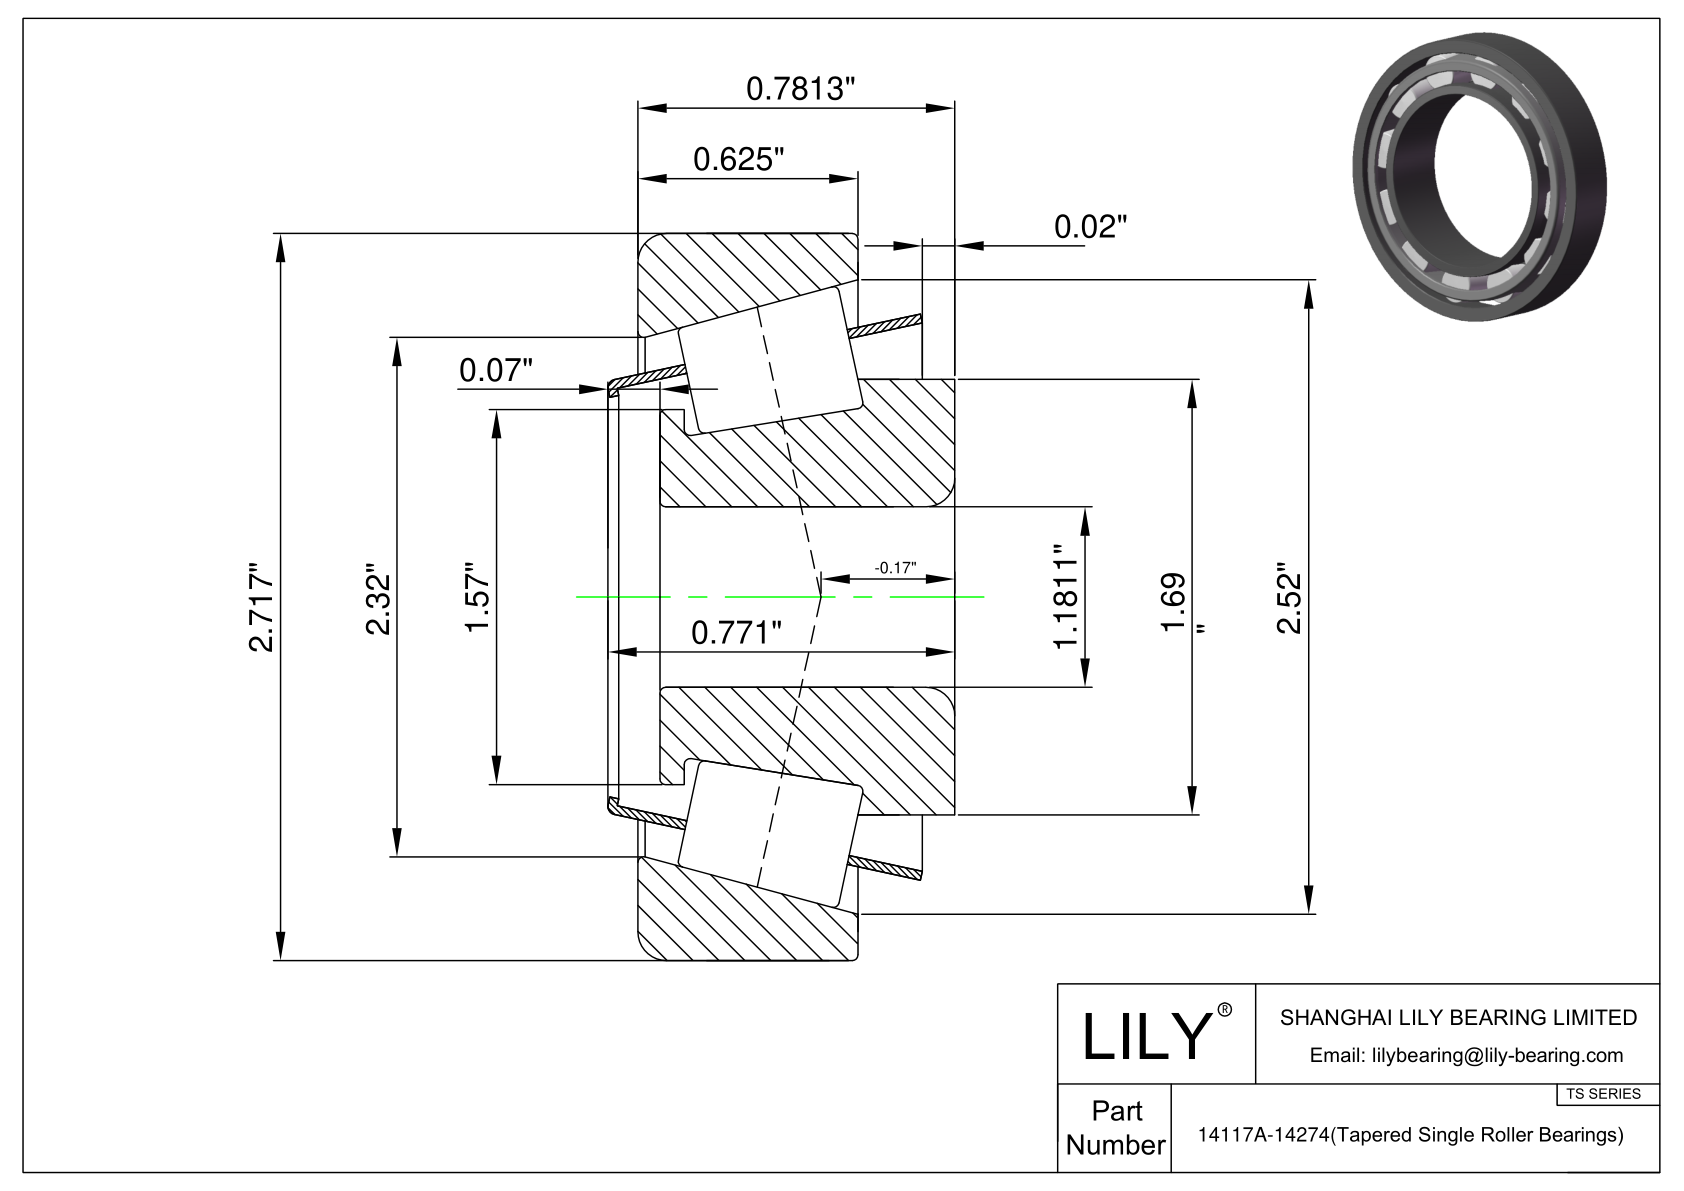 14117A-14274 TS (Tapered Single Roller Bearings) (Imperial) cad drawing